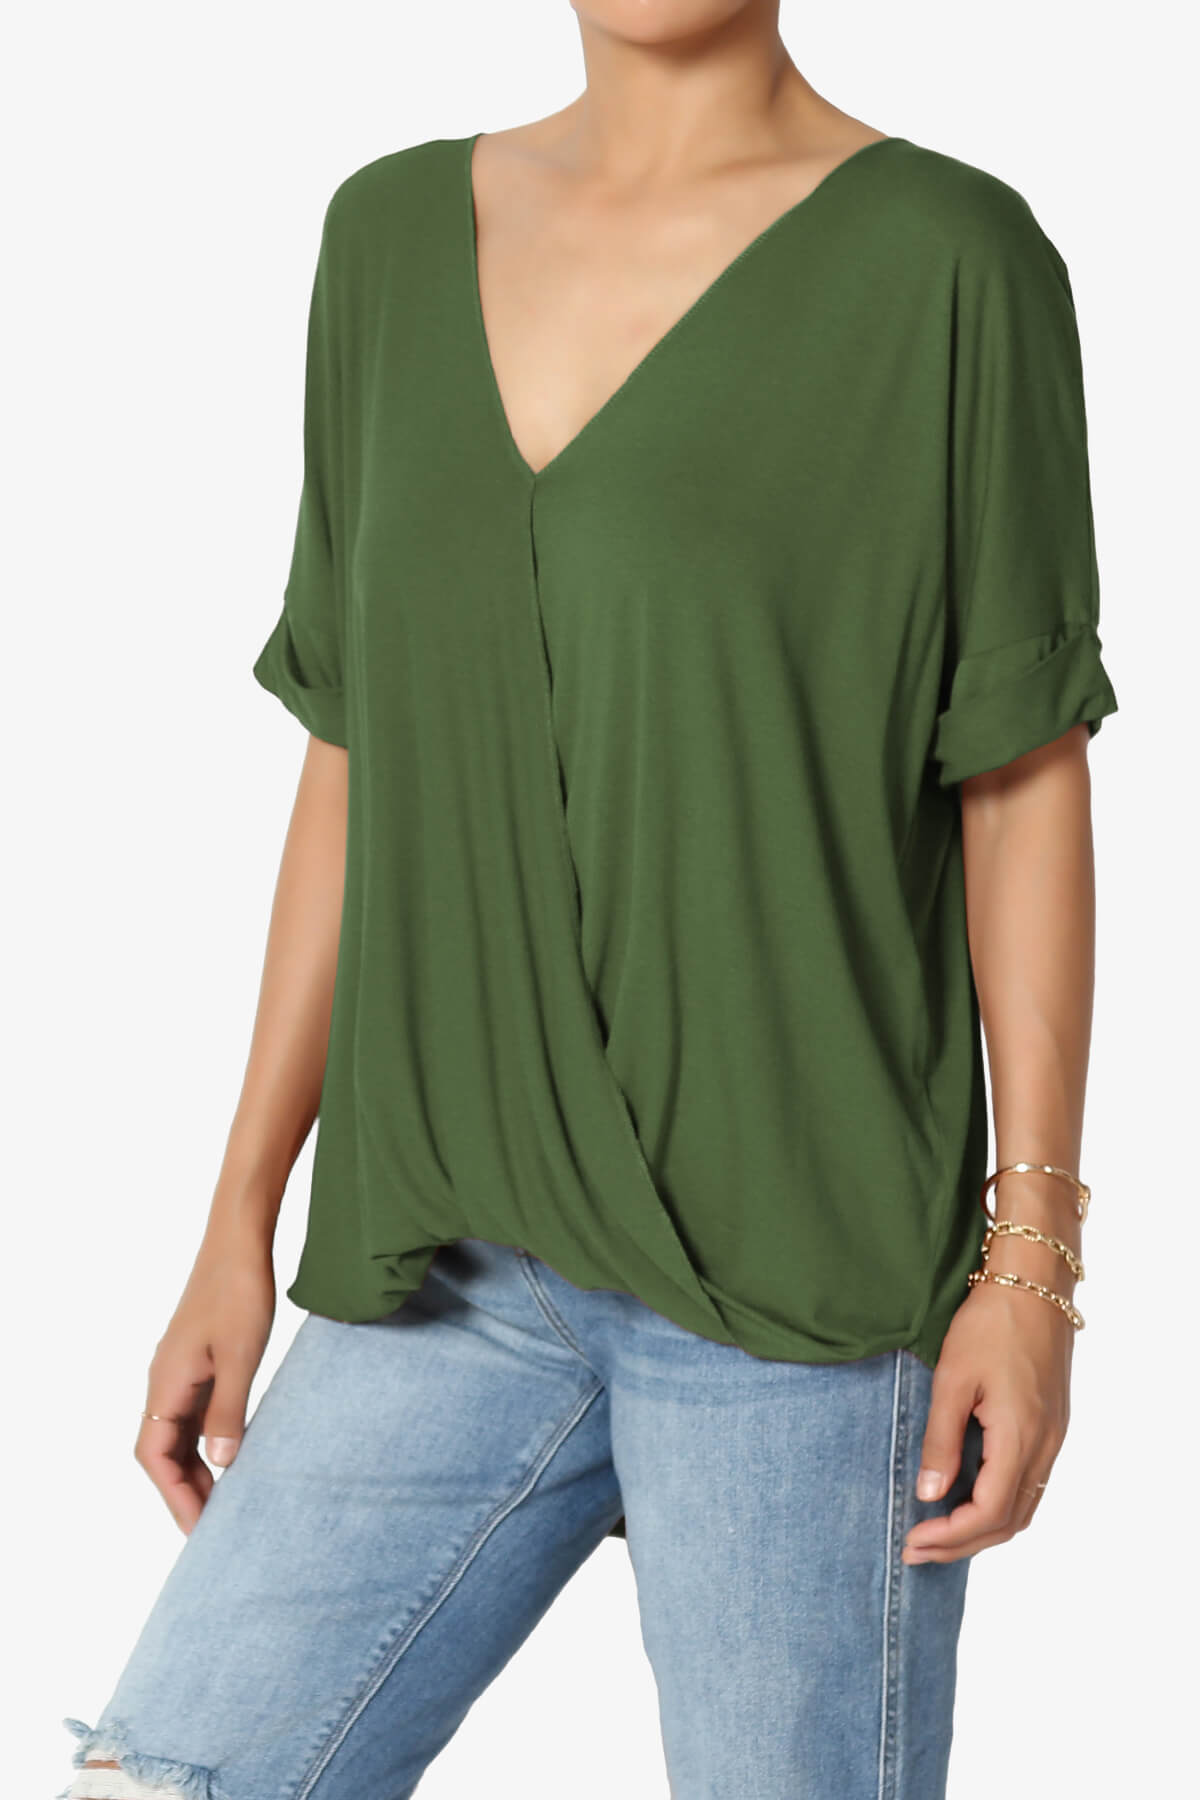 Tackle Wrap Hi-Low Crepe Knit Top ARMY GREEN_3